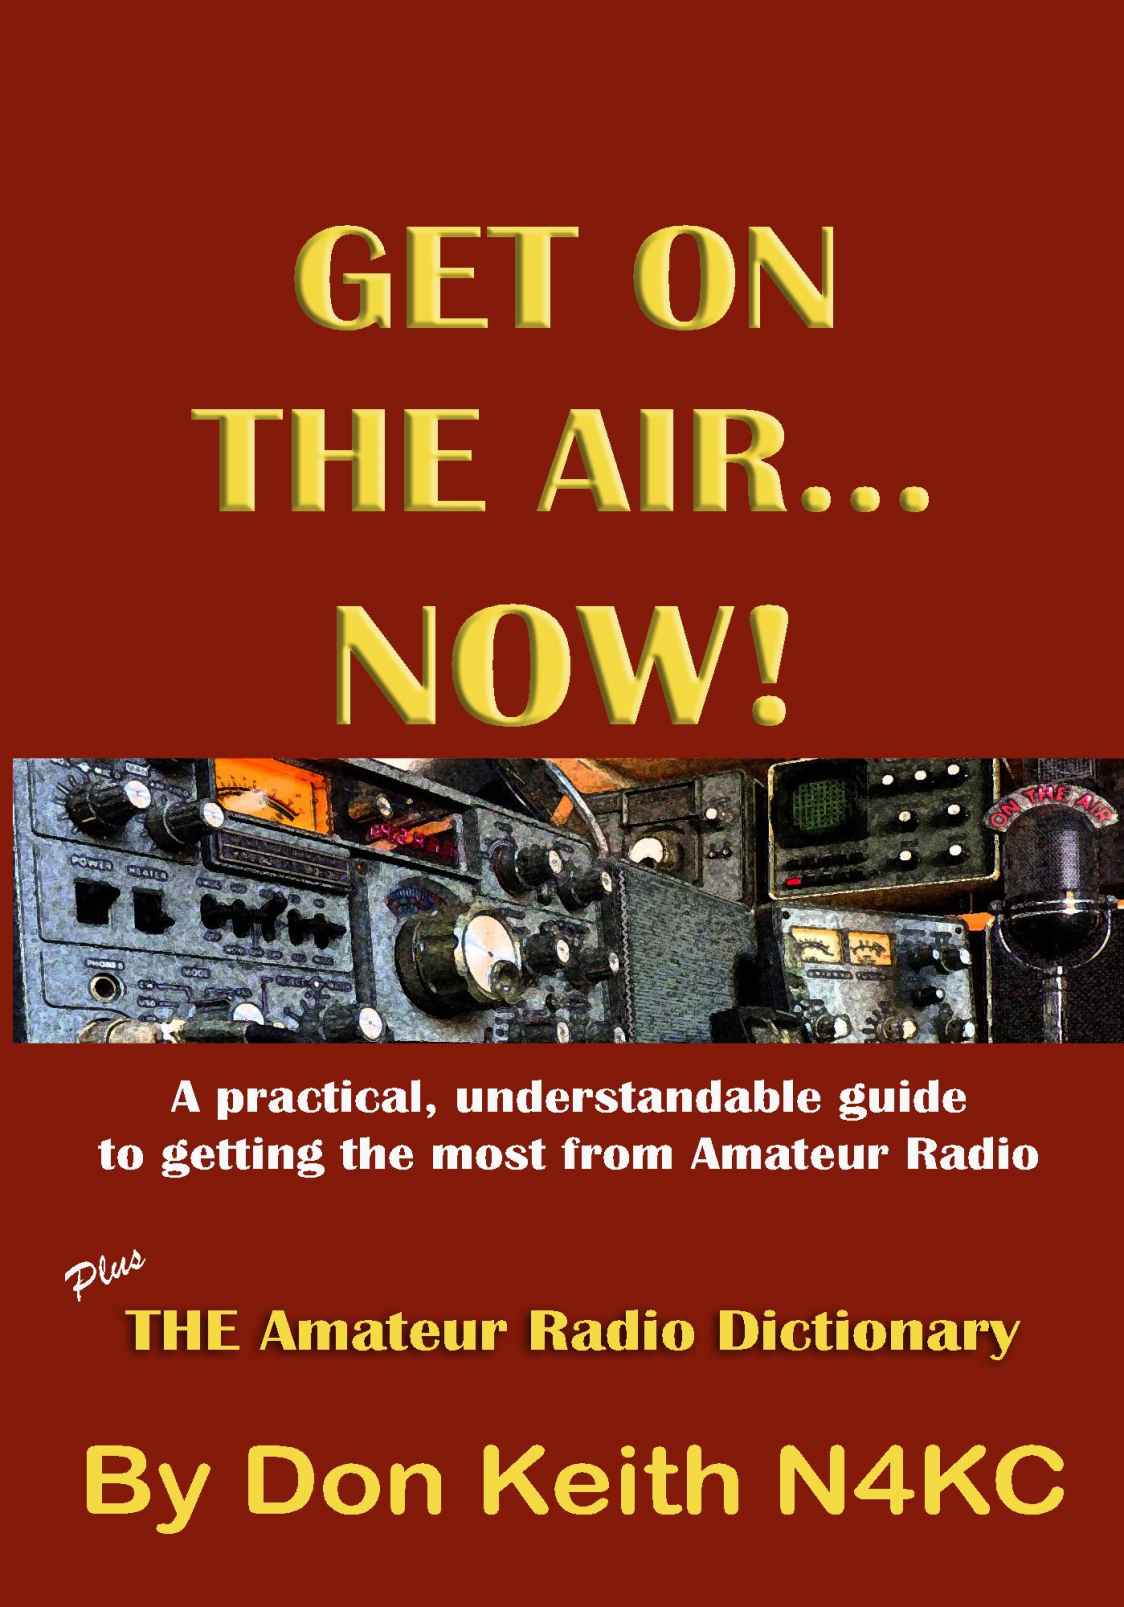 GET ON THE AIR...NOW! by Don Keith N4KC